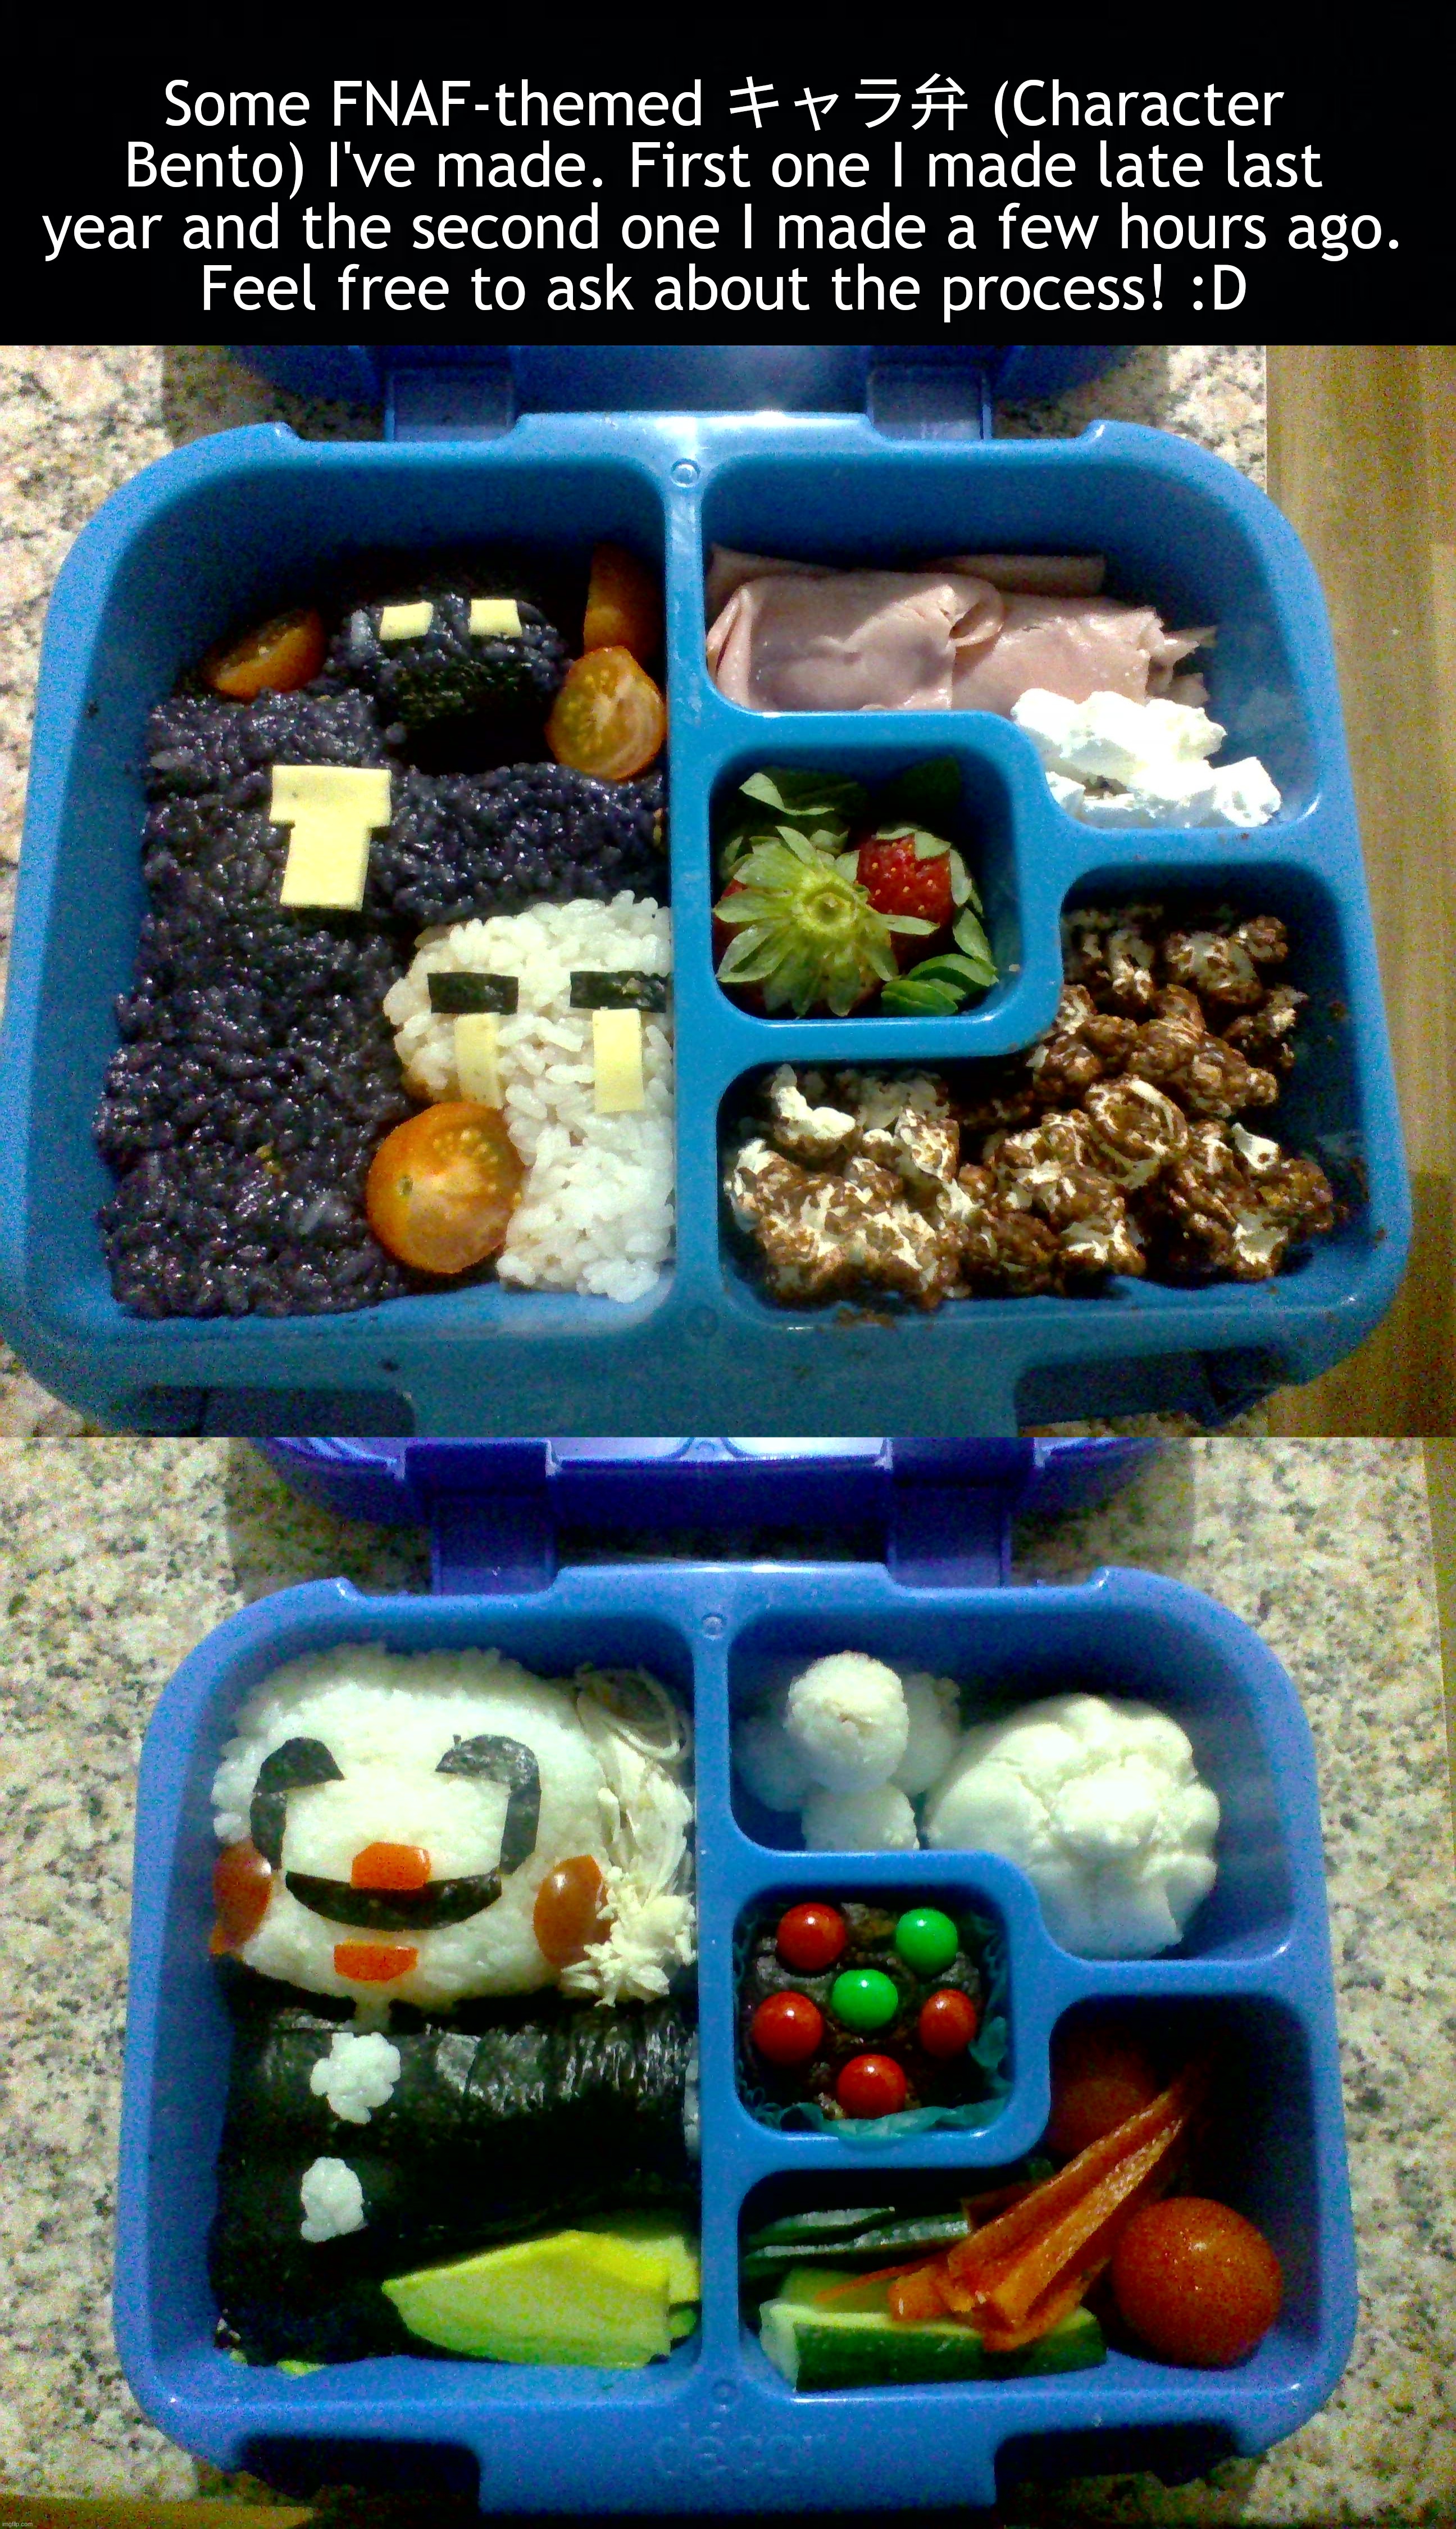 Ft. William Afton, Ghost and the Puppet! :D | Some FNAF-themed キャラ弁 (Character Bento) I've made. First one I made late last year and the second one I made a few hours ago.
Feel free to ask about the process! :D | image tagged in fnaf,five nights at freddys,kyaraben,bento,food | made w/ Imgflip meme maker